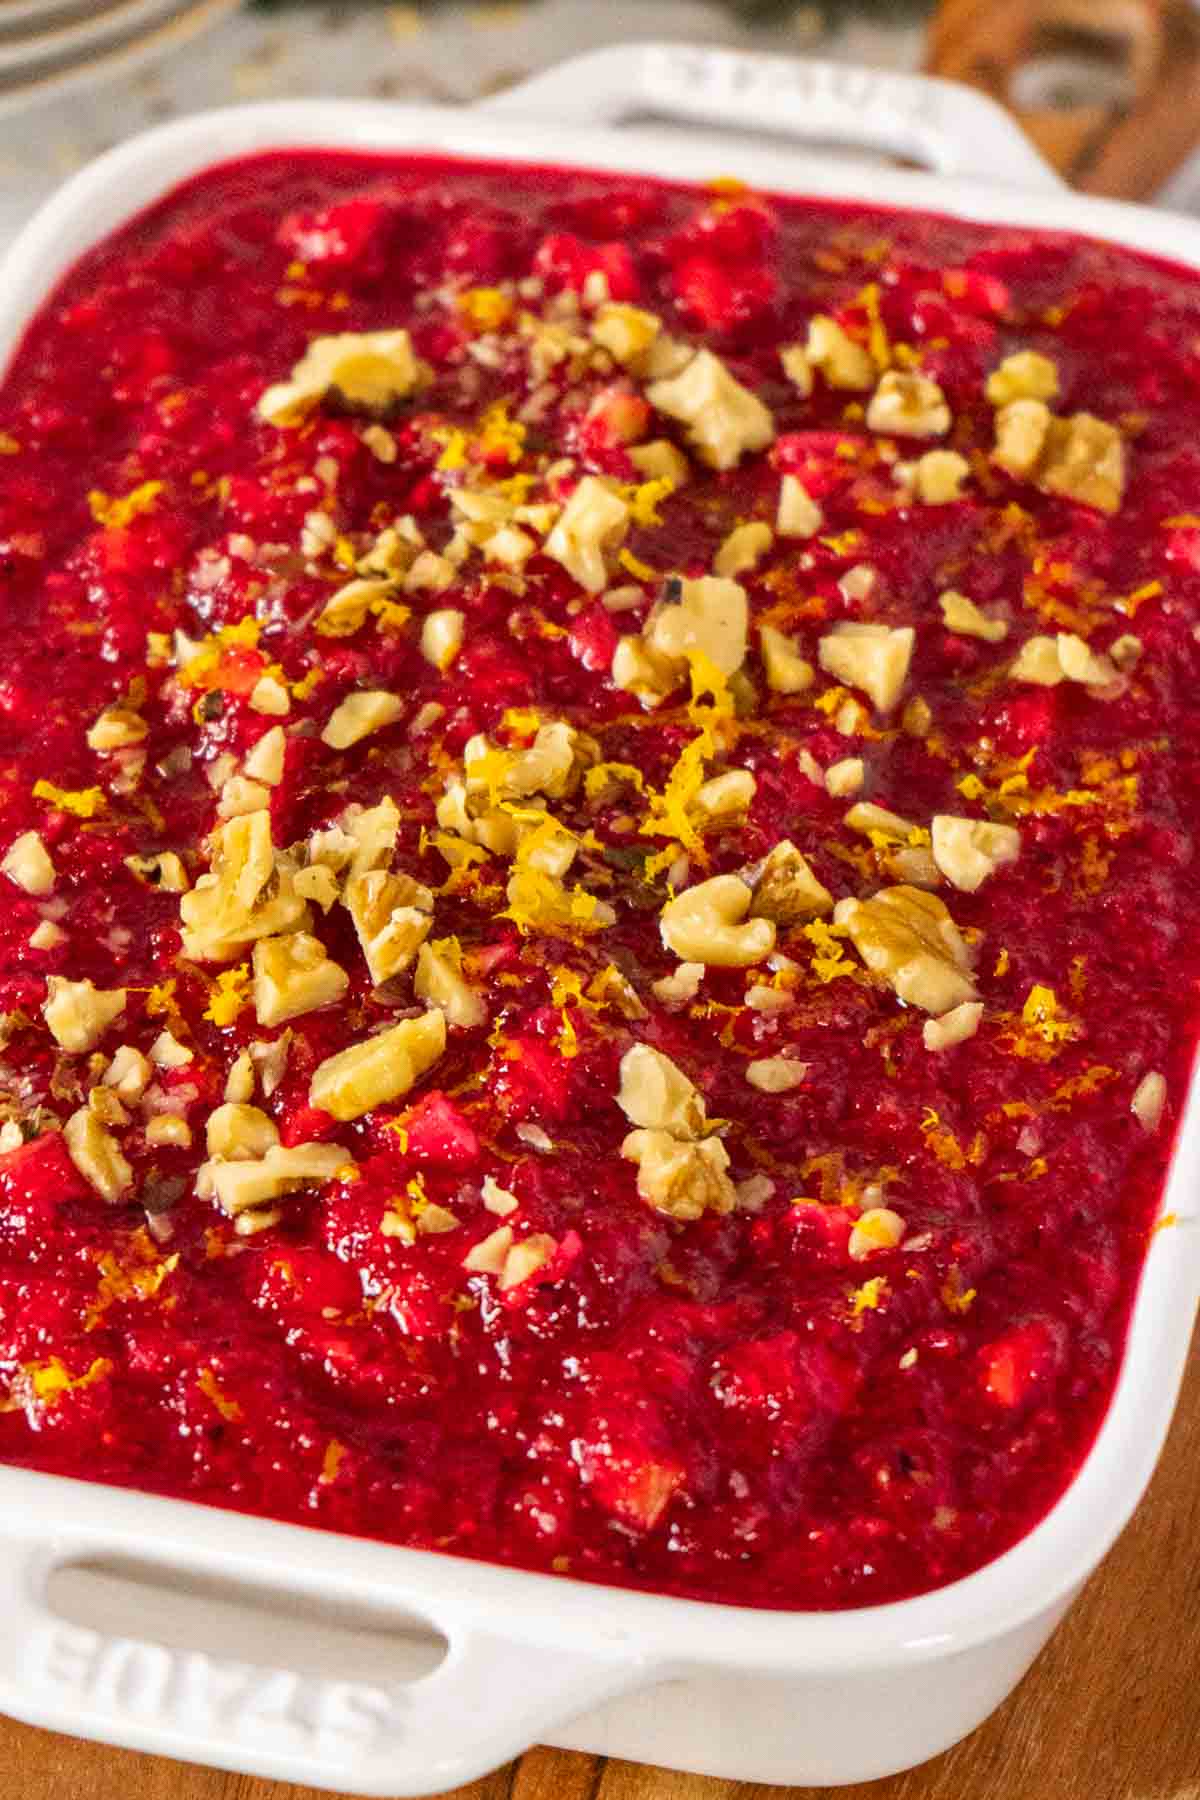 Cranberry jello salad in a white serving dish topped with chopped walnuts and orange zest.